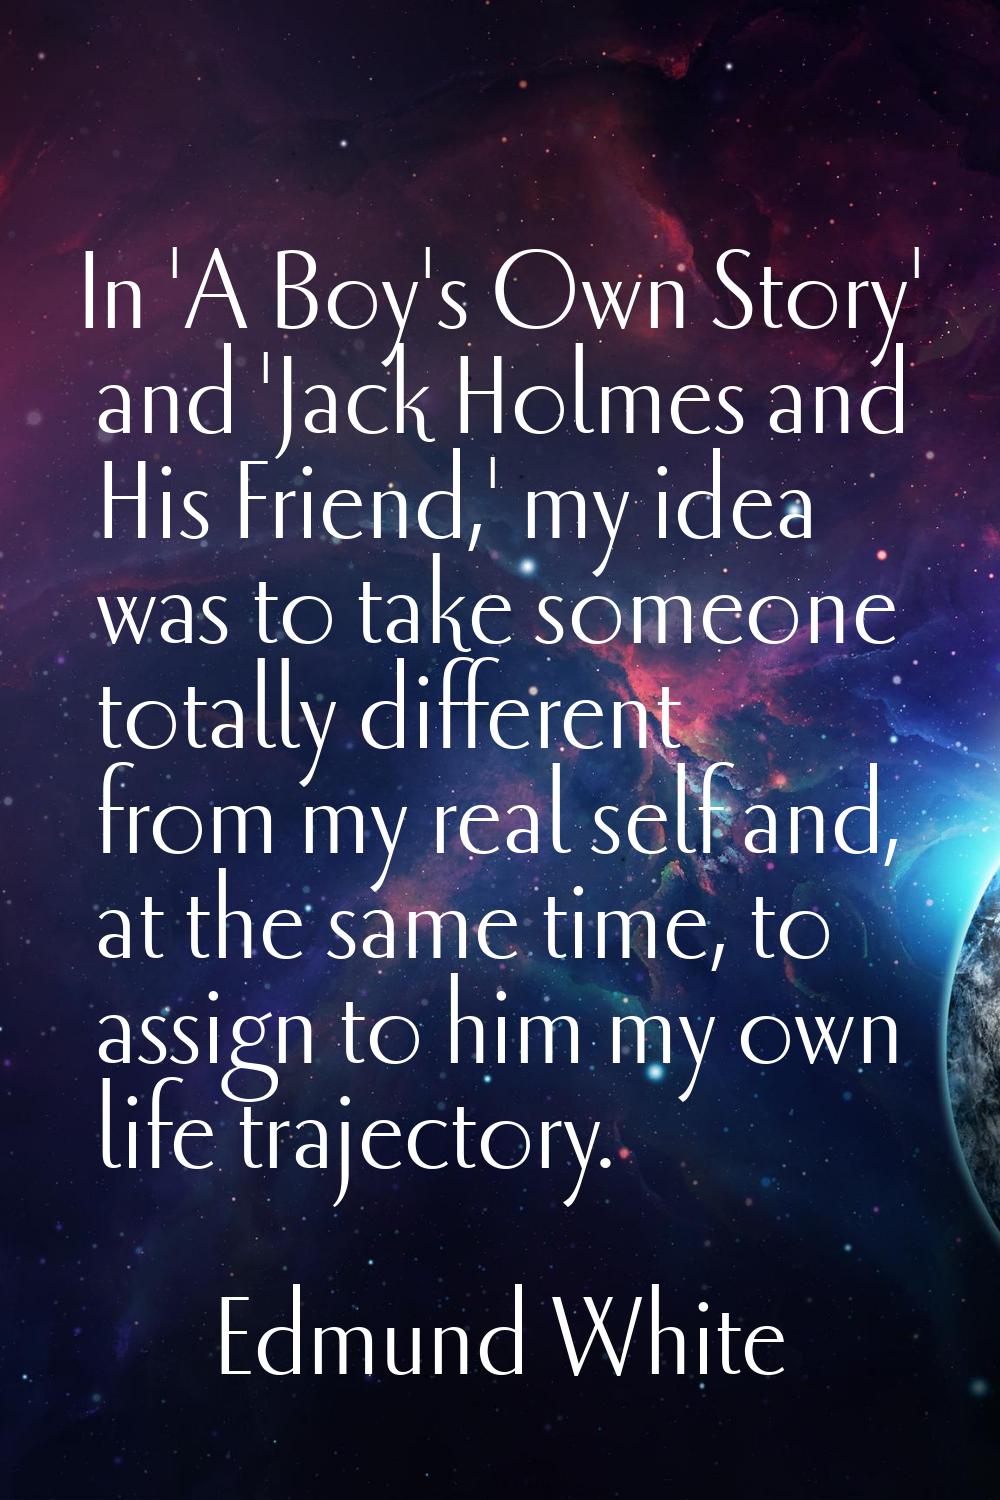 In 'A Boy's Own Story' and 'Jack Holmes and His Friend,' my idea was to take someone totally differ